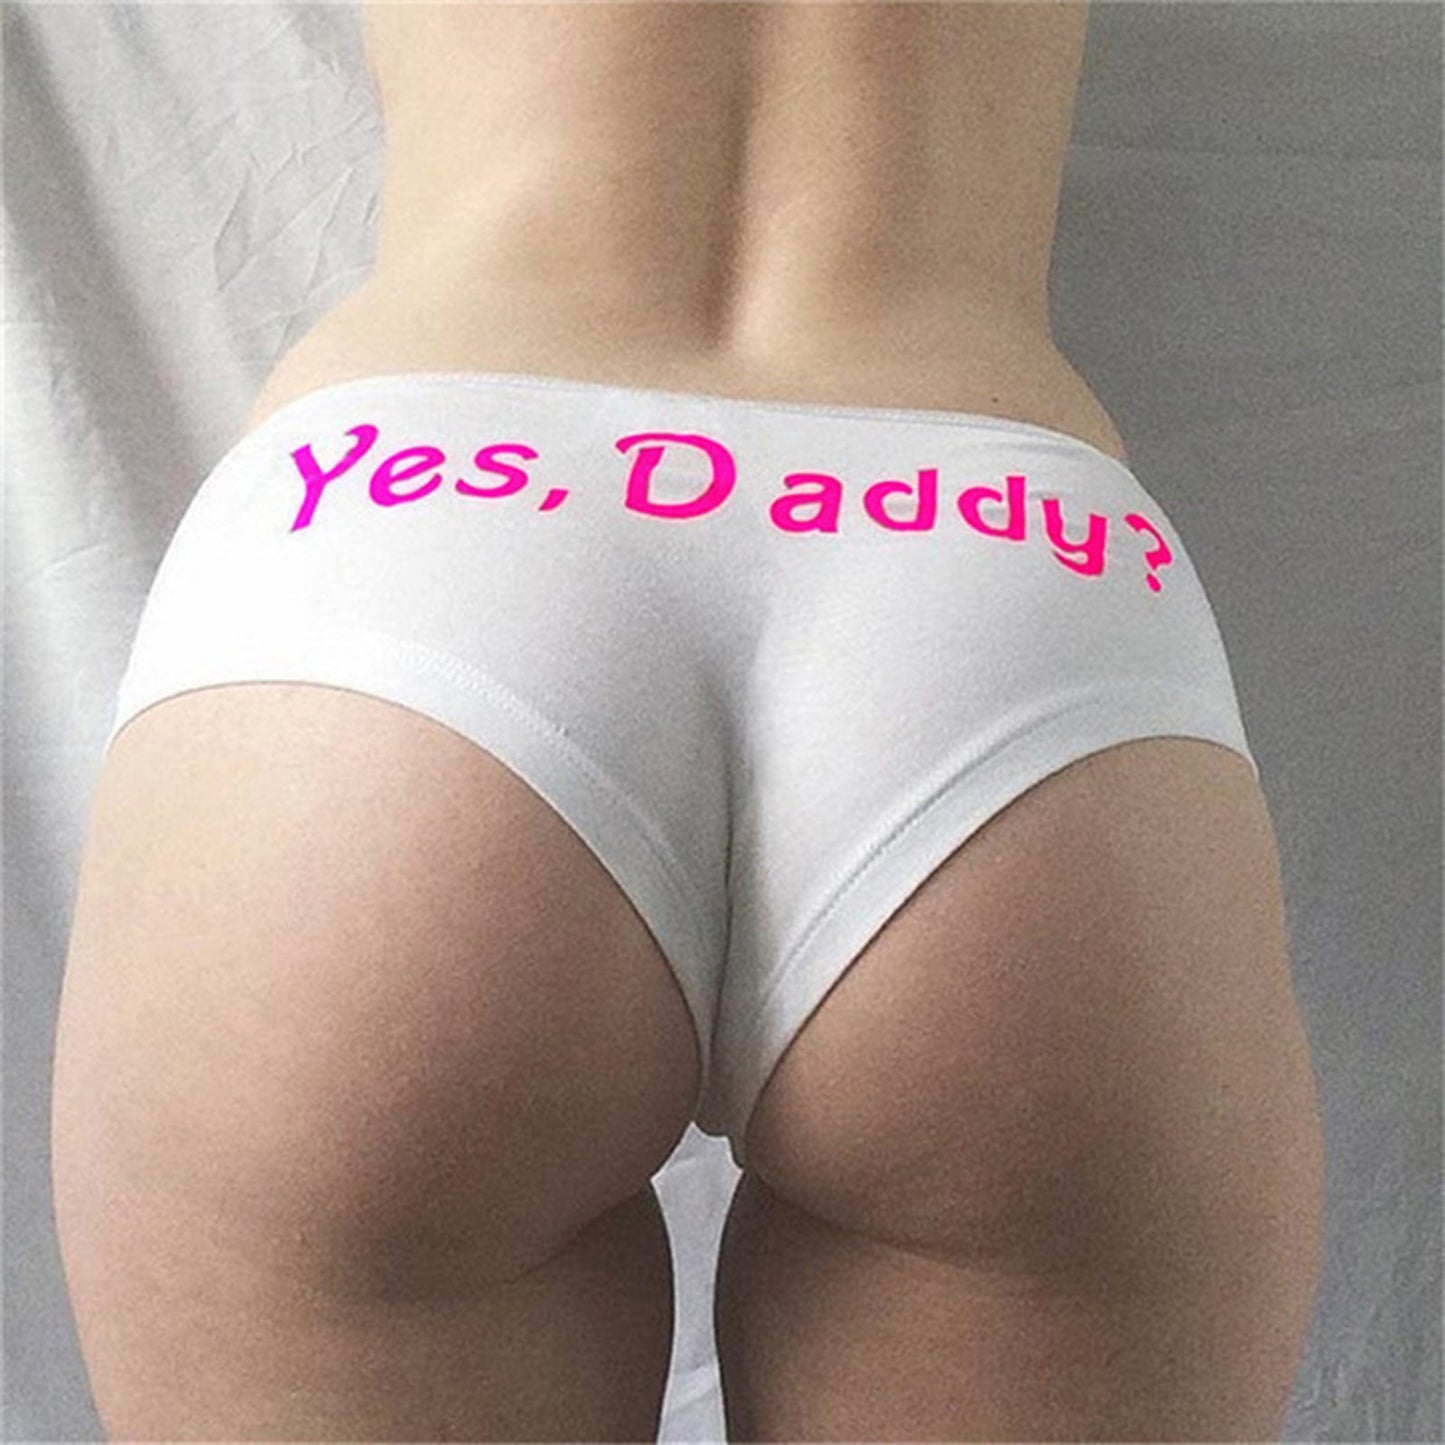 Yes, Daddy?